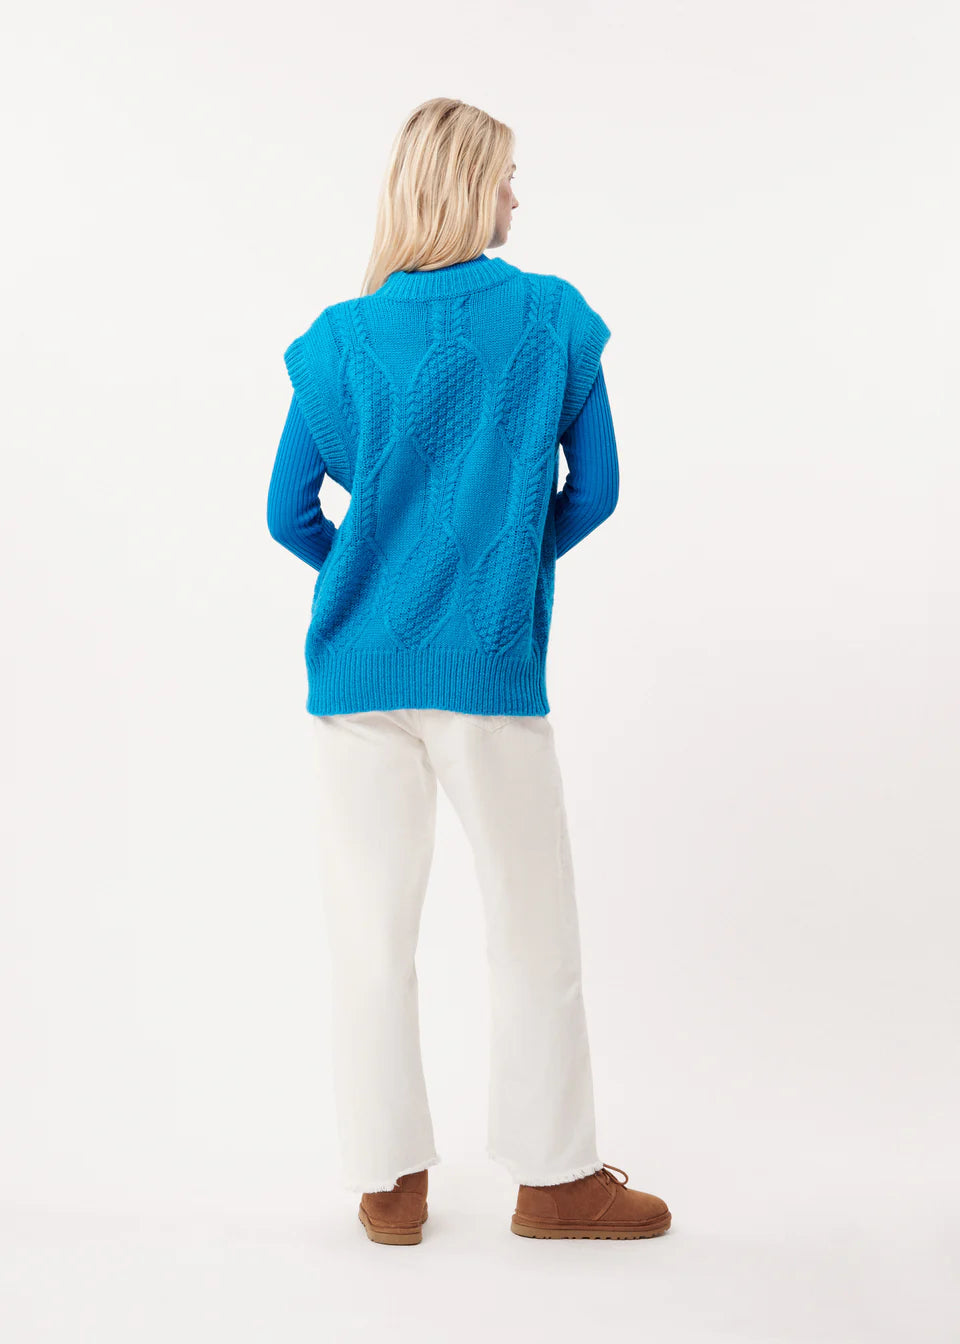 Maddy Pullover Sweater